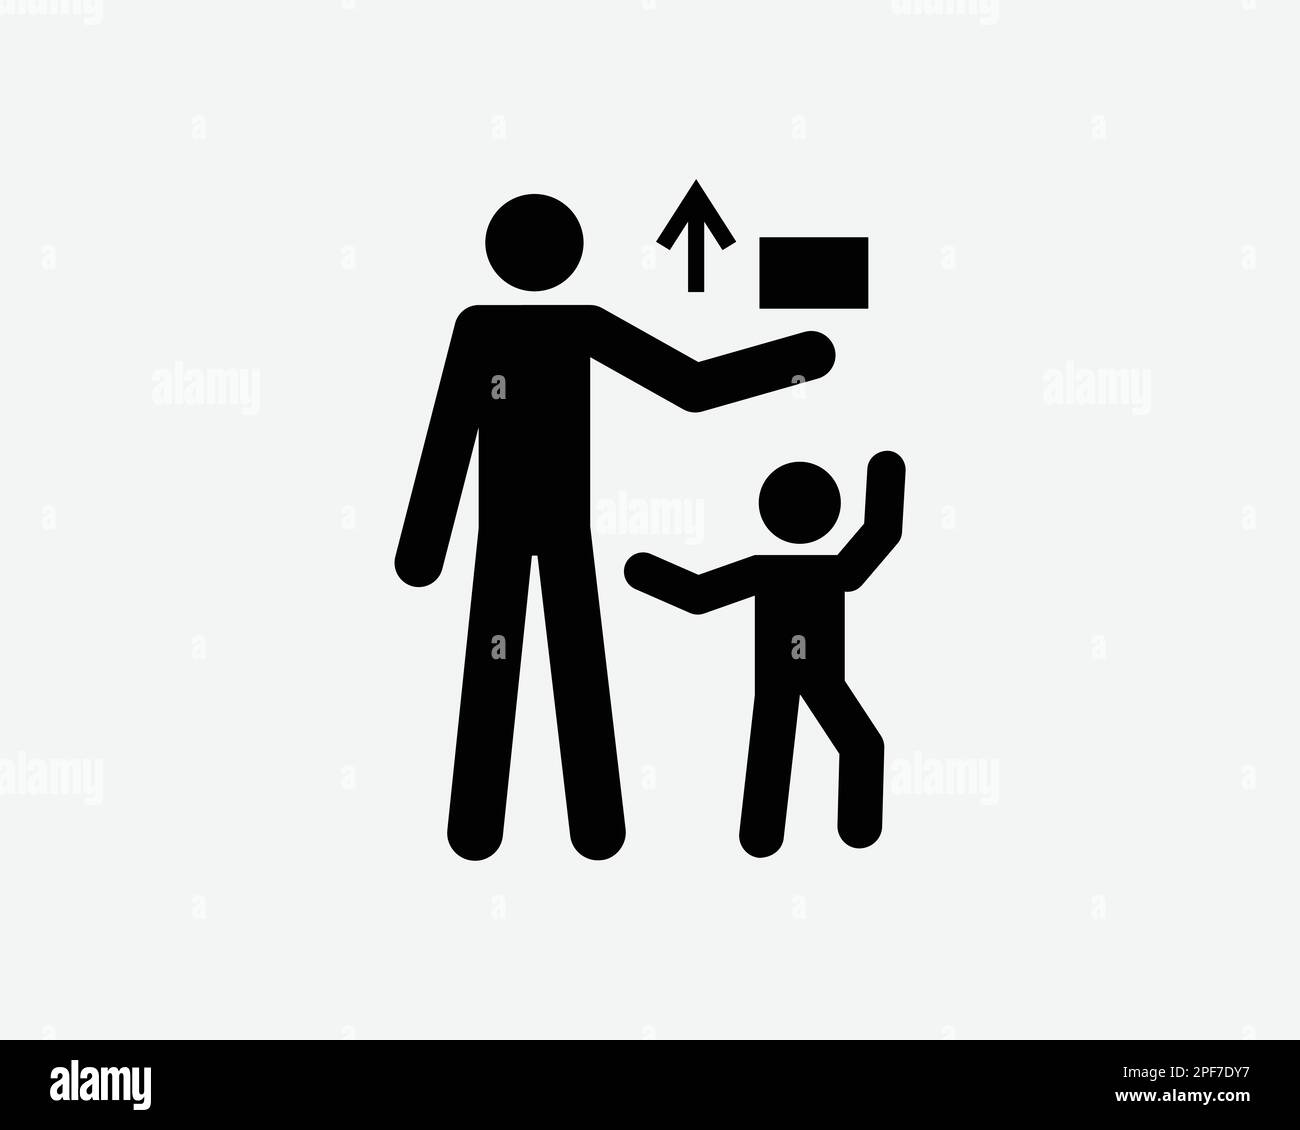 Keep Out of Reach of Children Child Kid Safety Safe Black White Silhouette Symbol Icon Sign Graphic Clipart Artwork Illustration Pictogram Vector Stock Vector